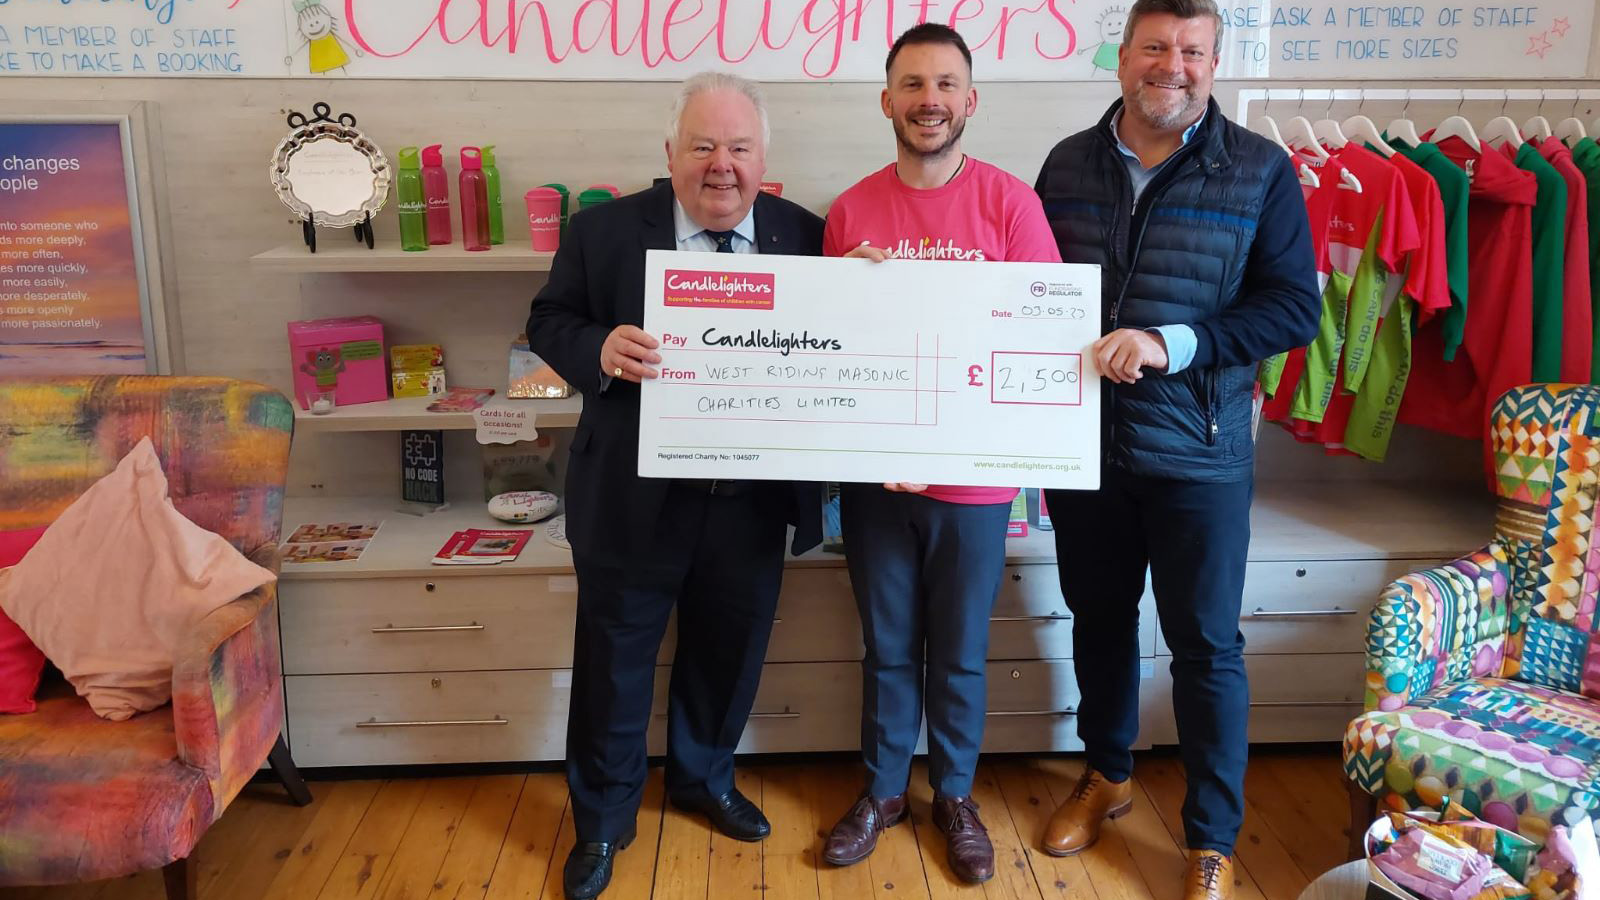 Presenting the cheque to The Candlelighters. Pictured left: Keith Madley (The Leeds Lodge), Chris Salt Candlelighters) and Simon Penny-Smith (Leeds Lodge).